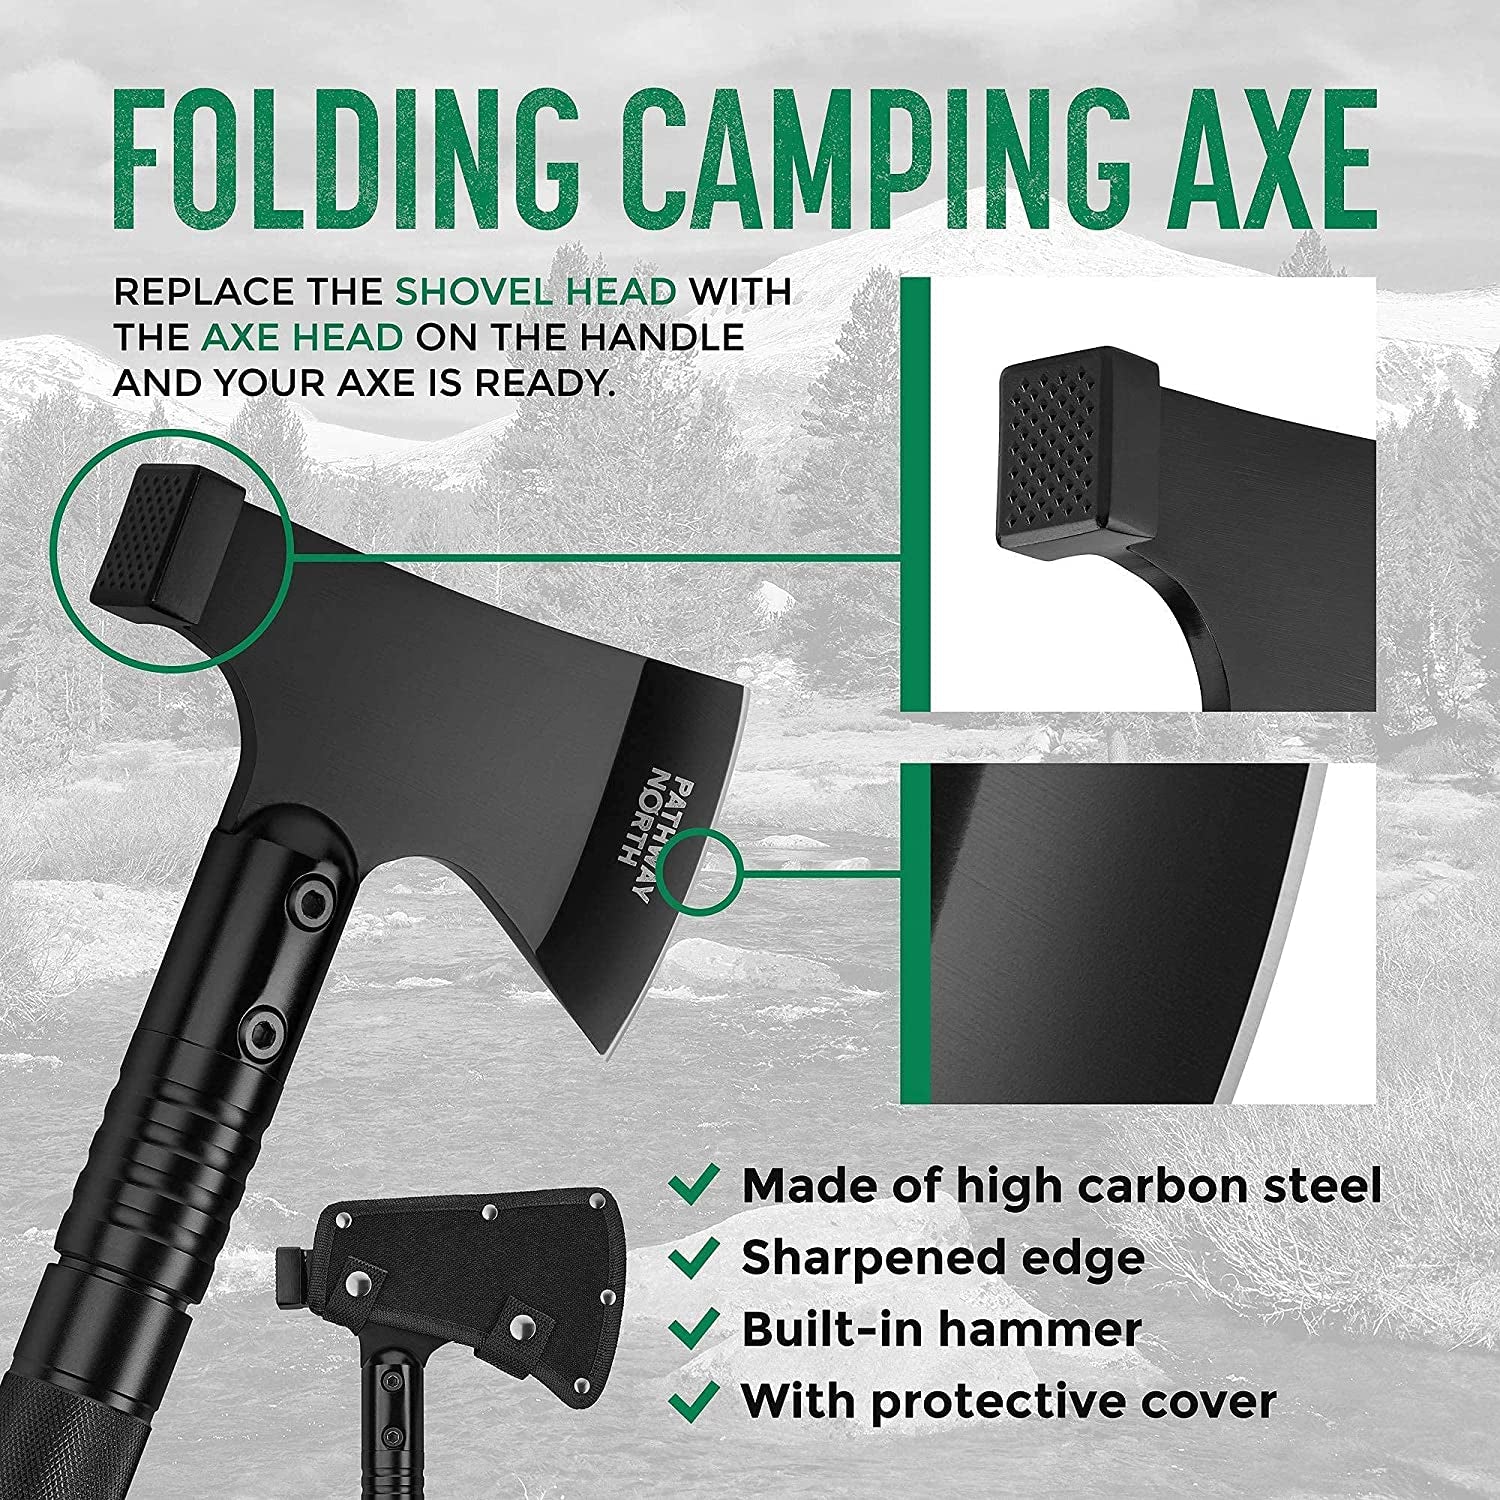 Survival Shovel and Camping Axe – Stainless Steel Tactical, Survival Multi-Tool and Survival Hatchet Equipment for Outdoor Hiking Camping Gear, Hunting, Backpacking Emergency Kit(Black)